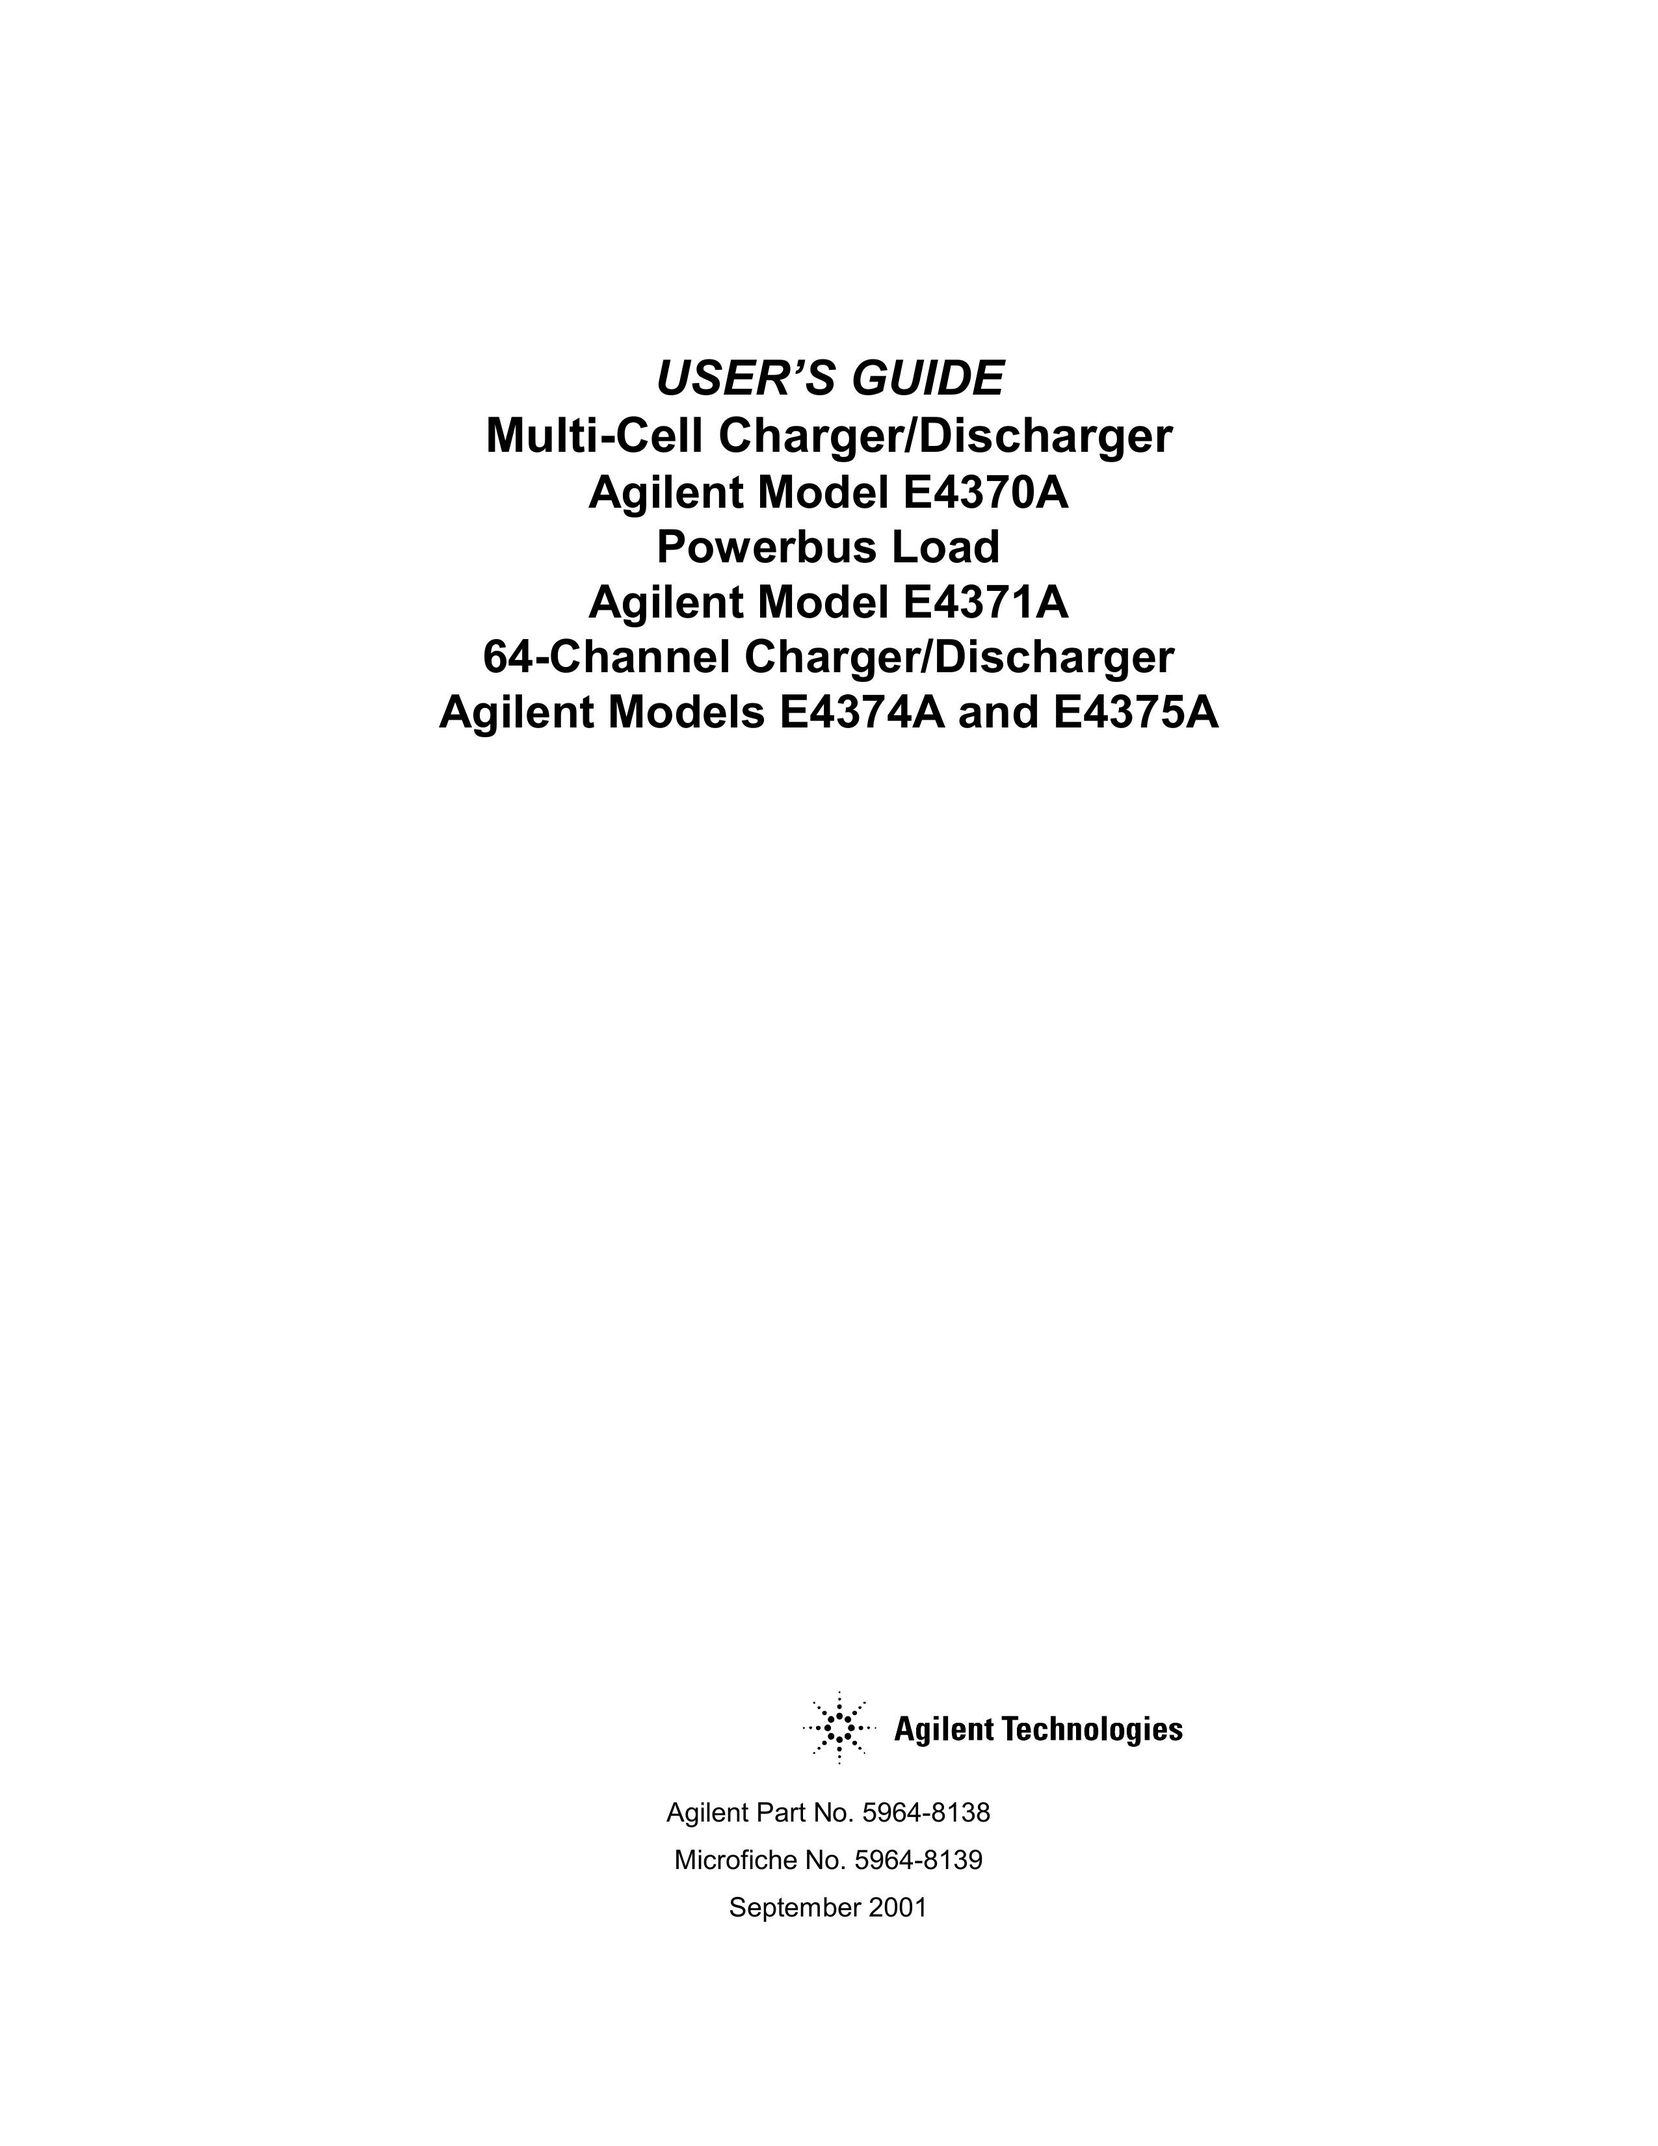 Agilent Technologies E4370A Video Gaming Accessories User Manual (Page 1)